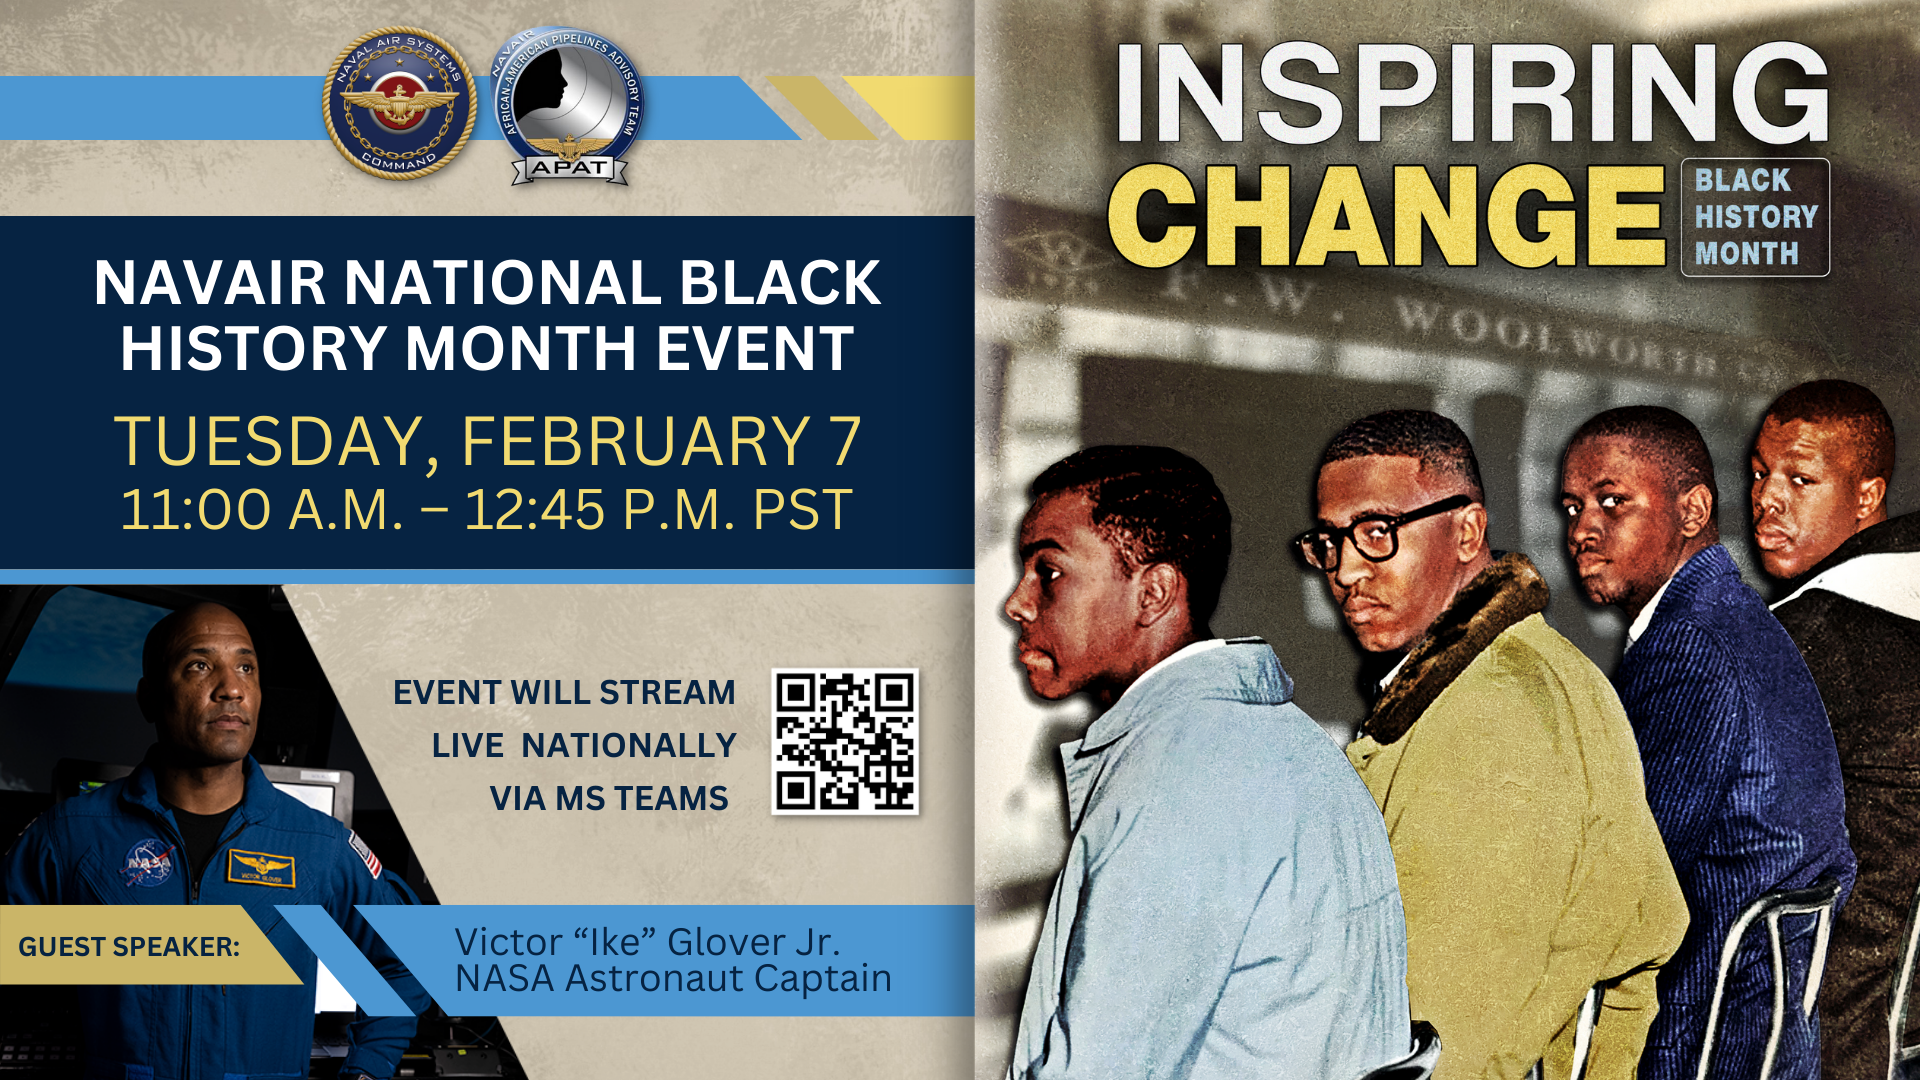 Inspiring Change: NAVAIR National Black History Month Event, Tuesday, February 7 11 AM-12:45 PM PST Guest speaker Capt. Victor “Ike” Glover 